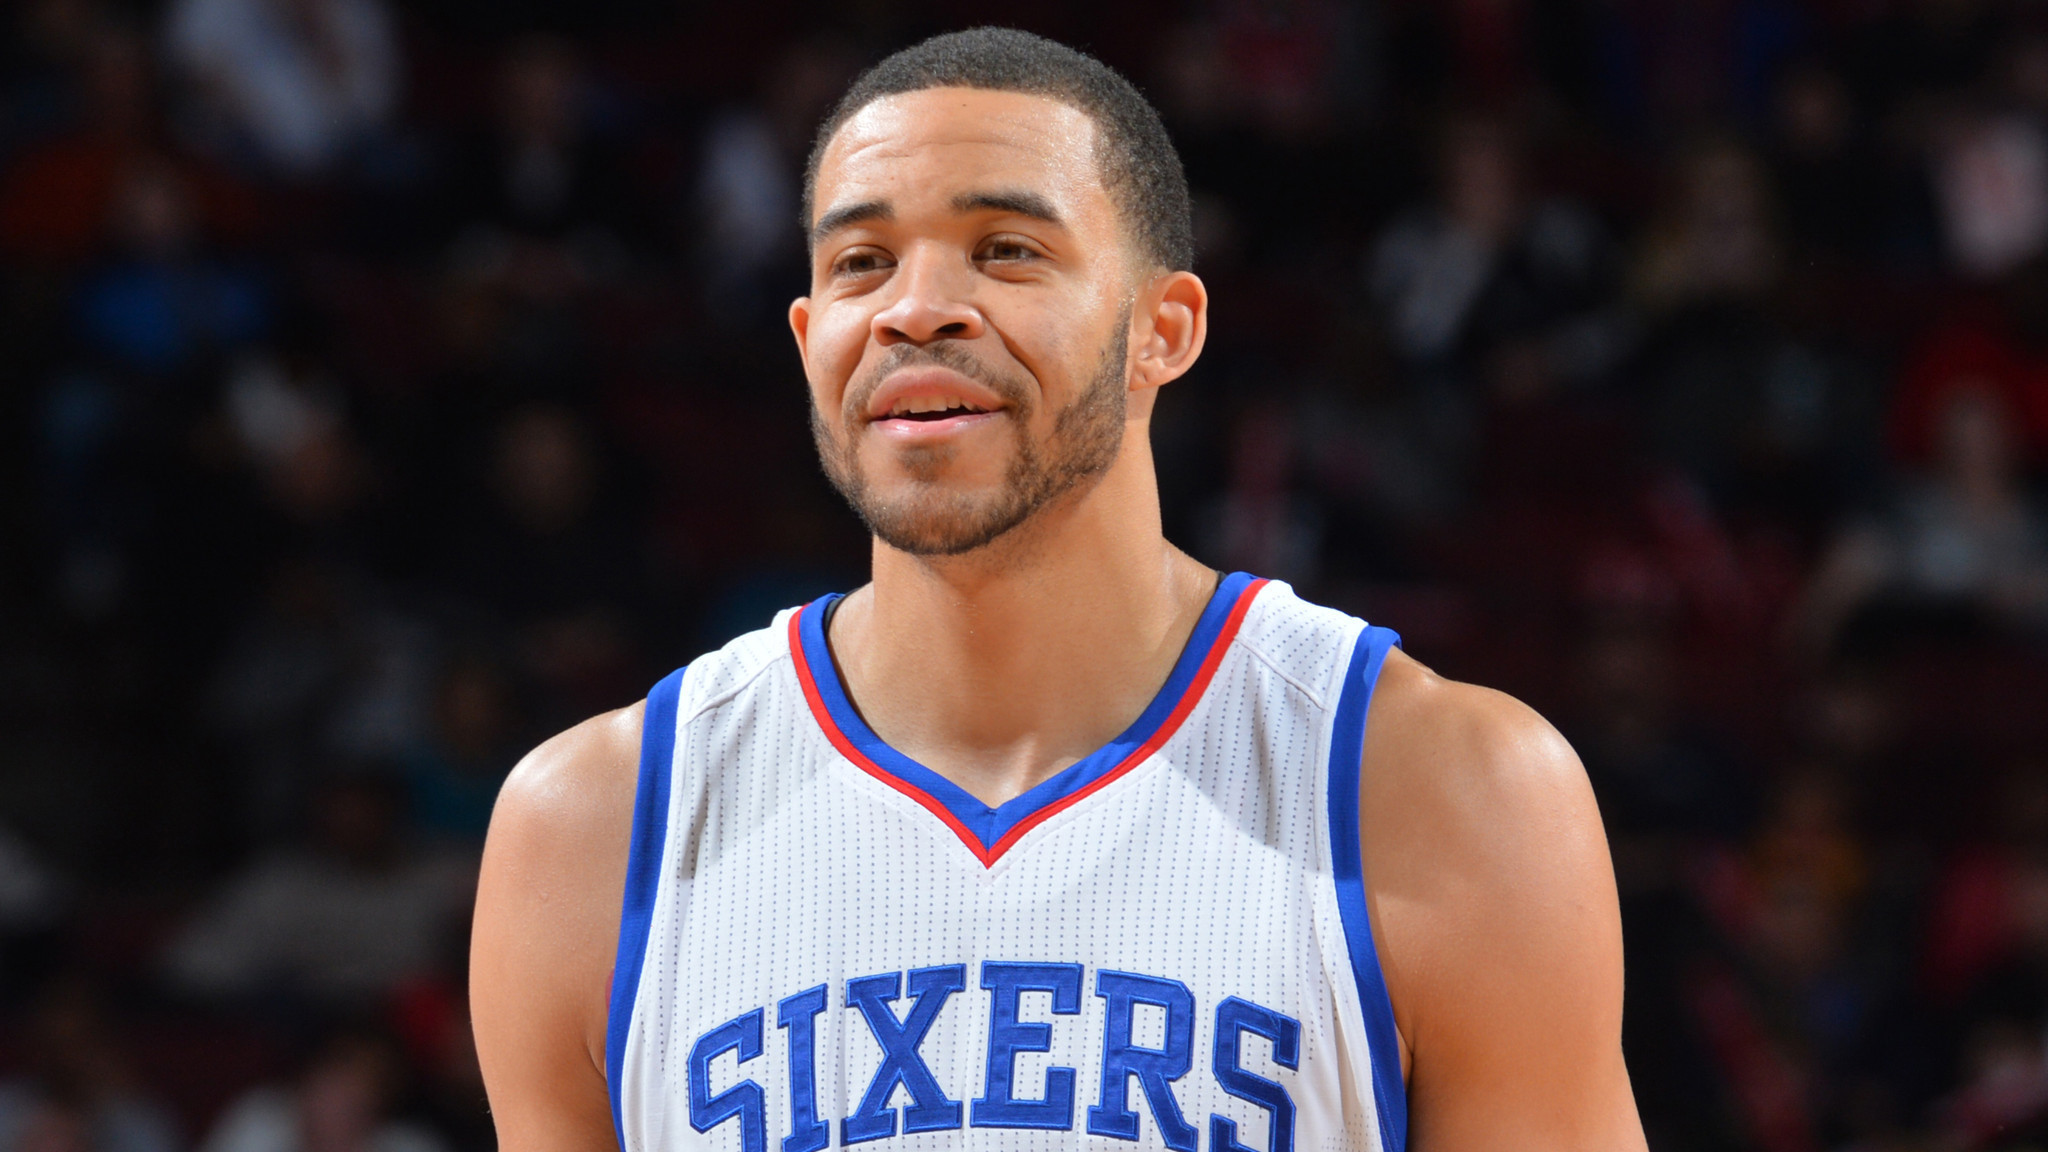 Clippers consider JaVale McGee in wake of DeAndre Jordan's departure - LA Times